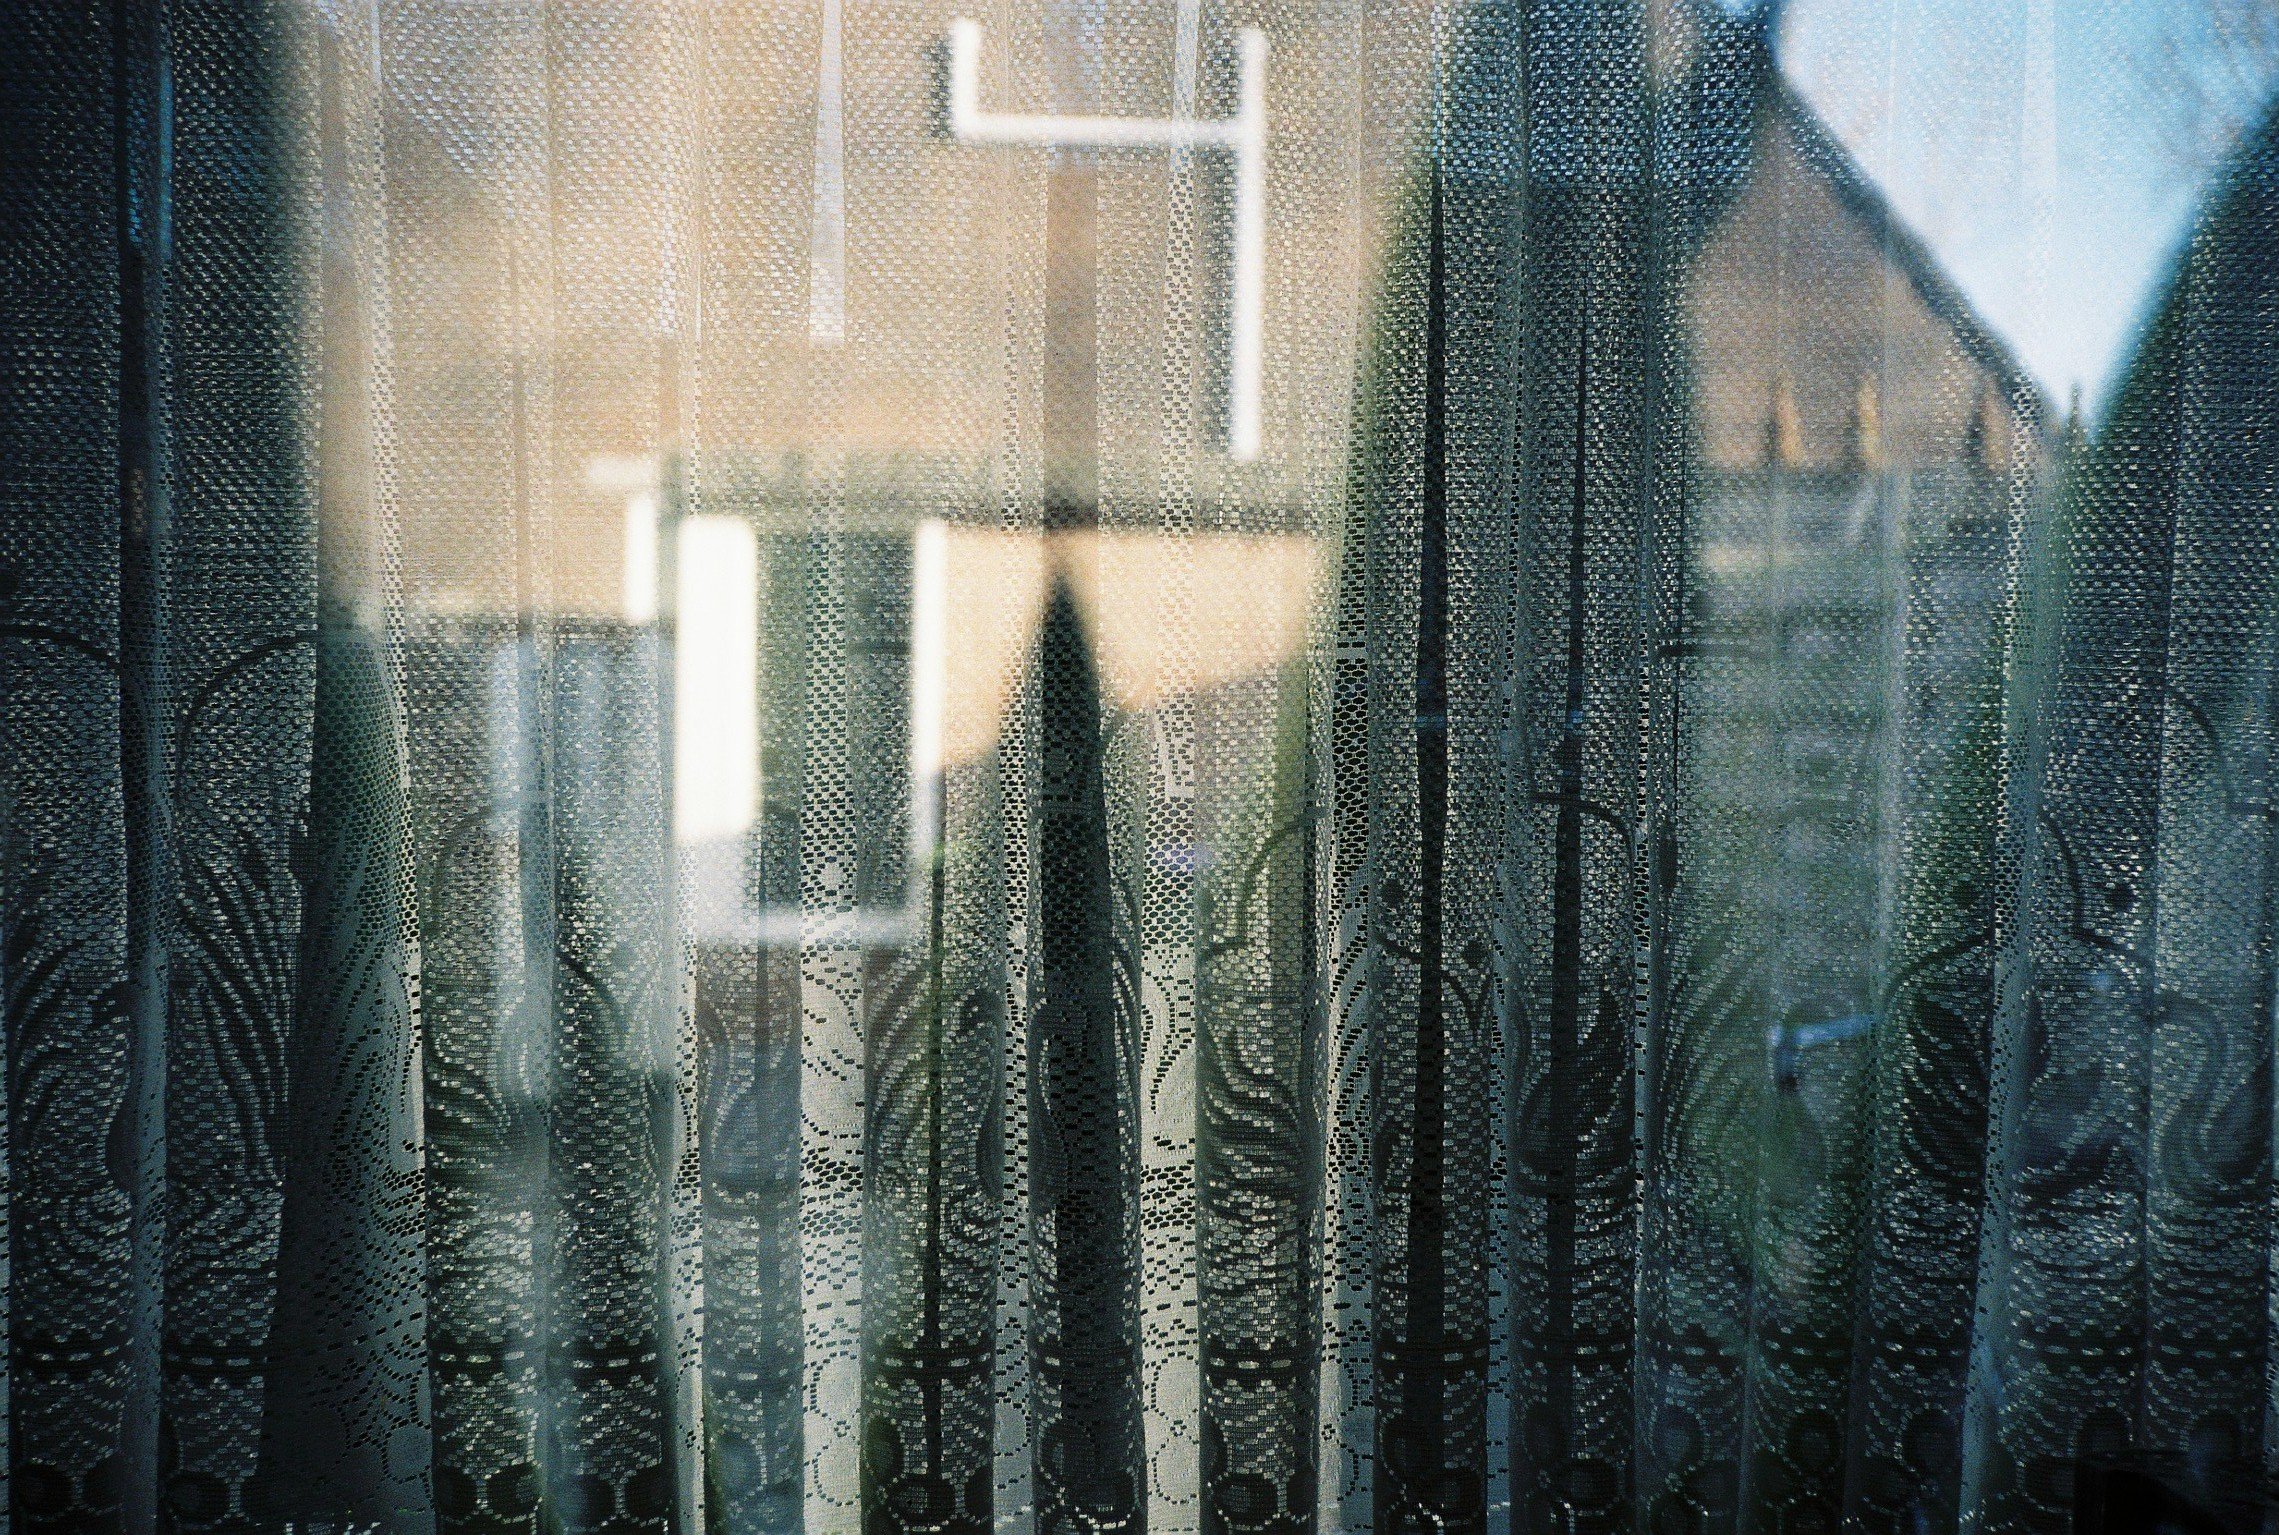 Close-up of a window with lace curtains, a house outside the window.